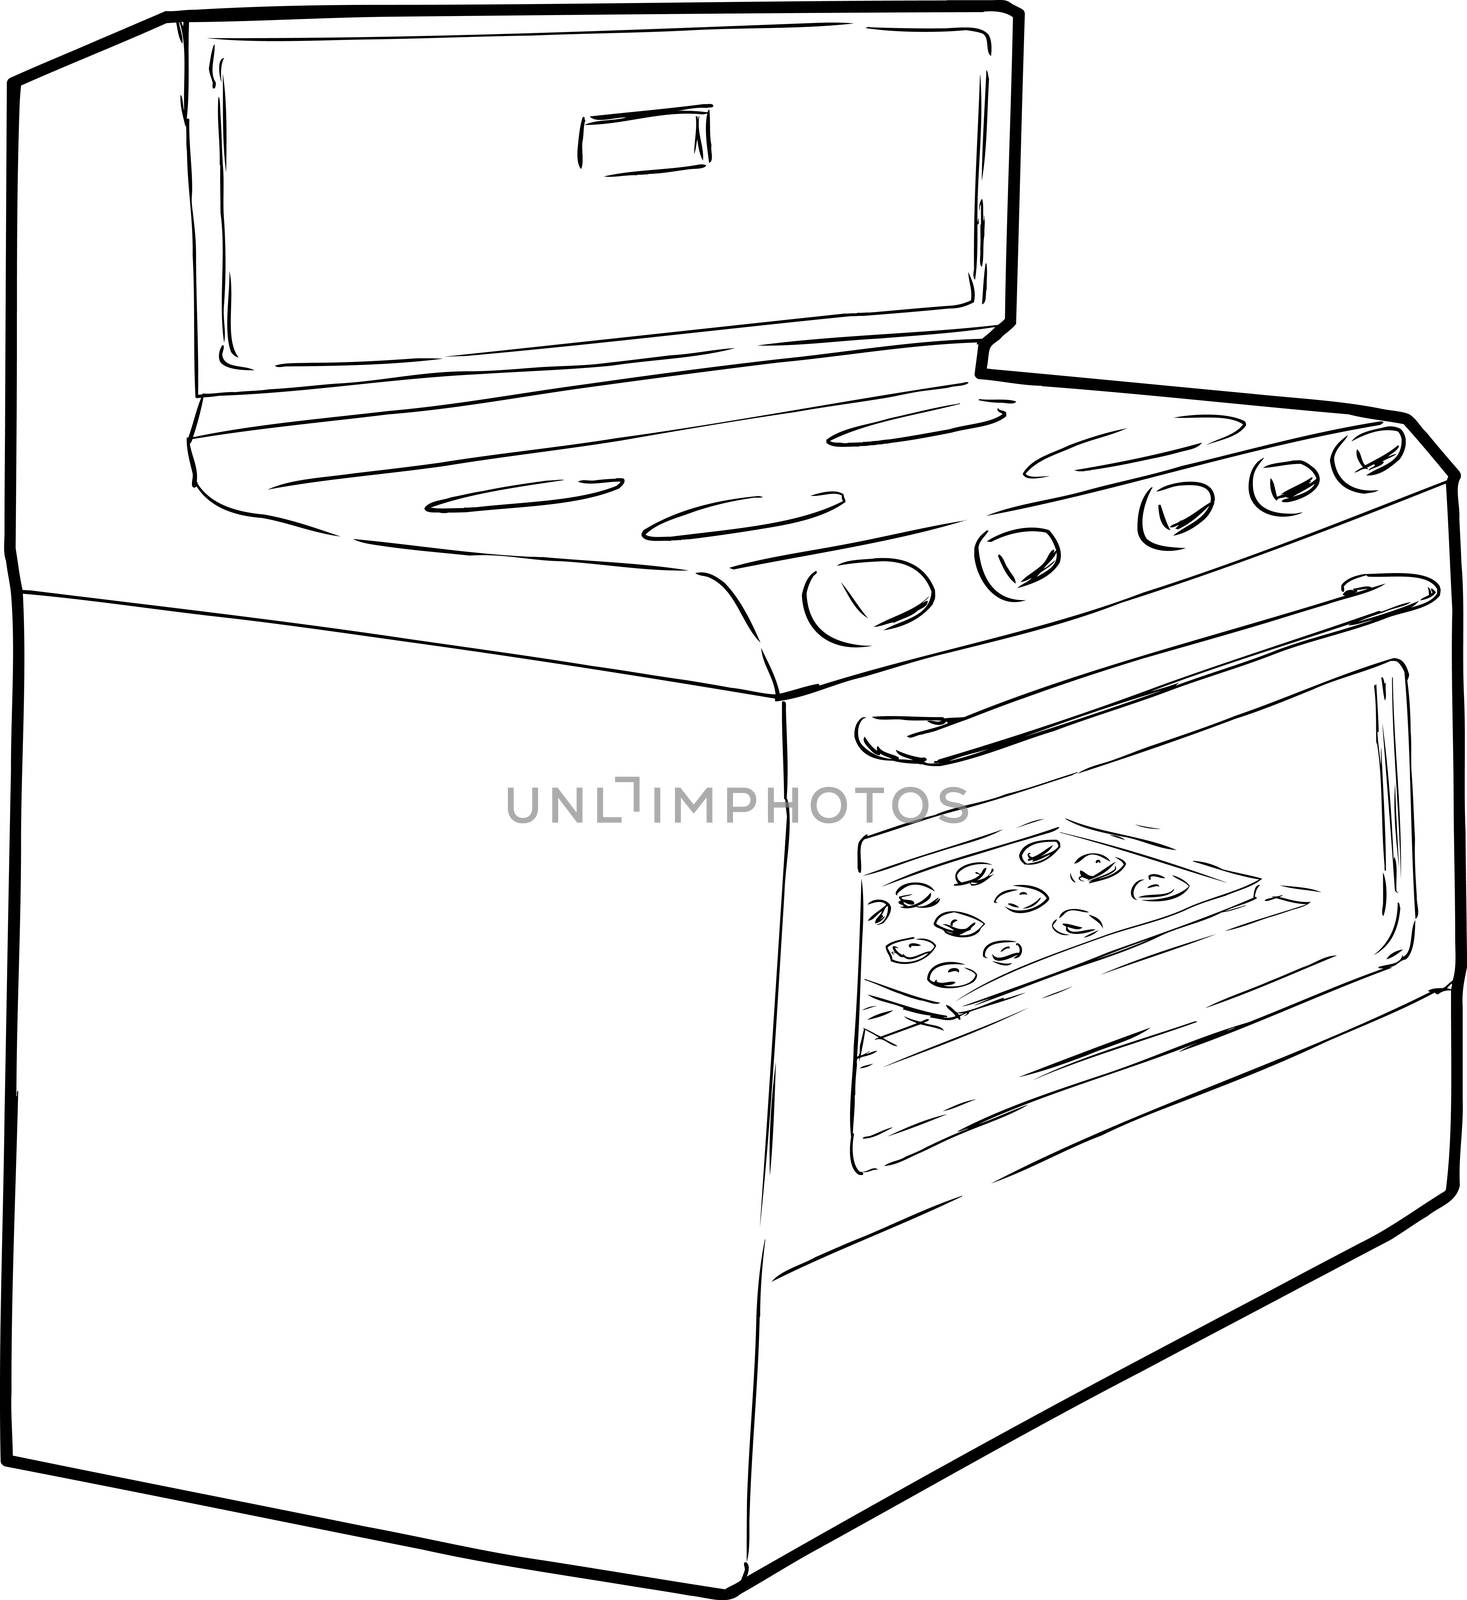 Outline sketch of induction stove with tray of cookies baking inside